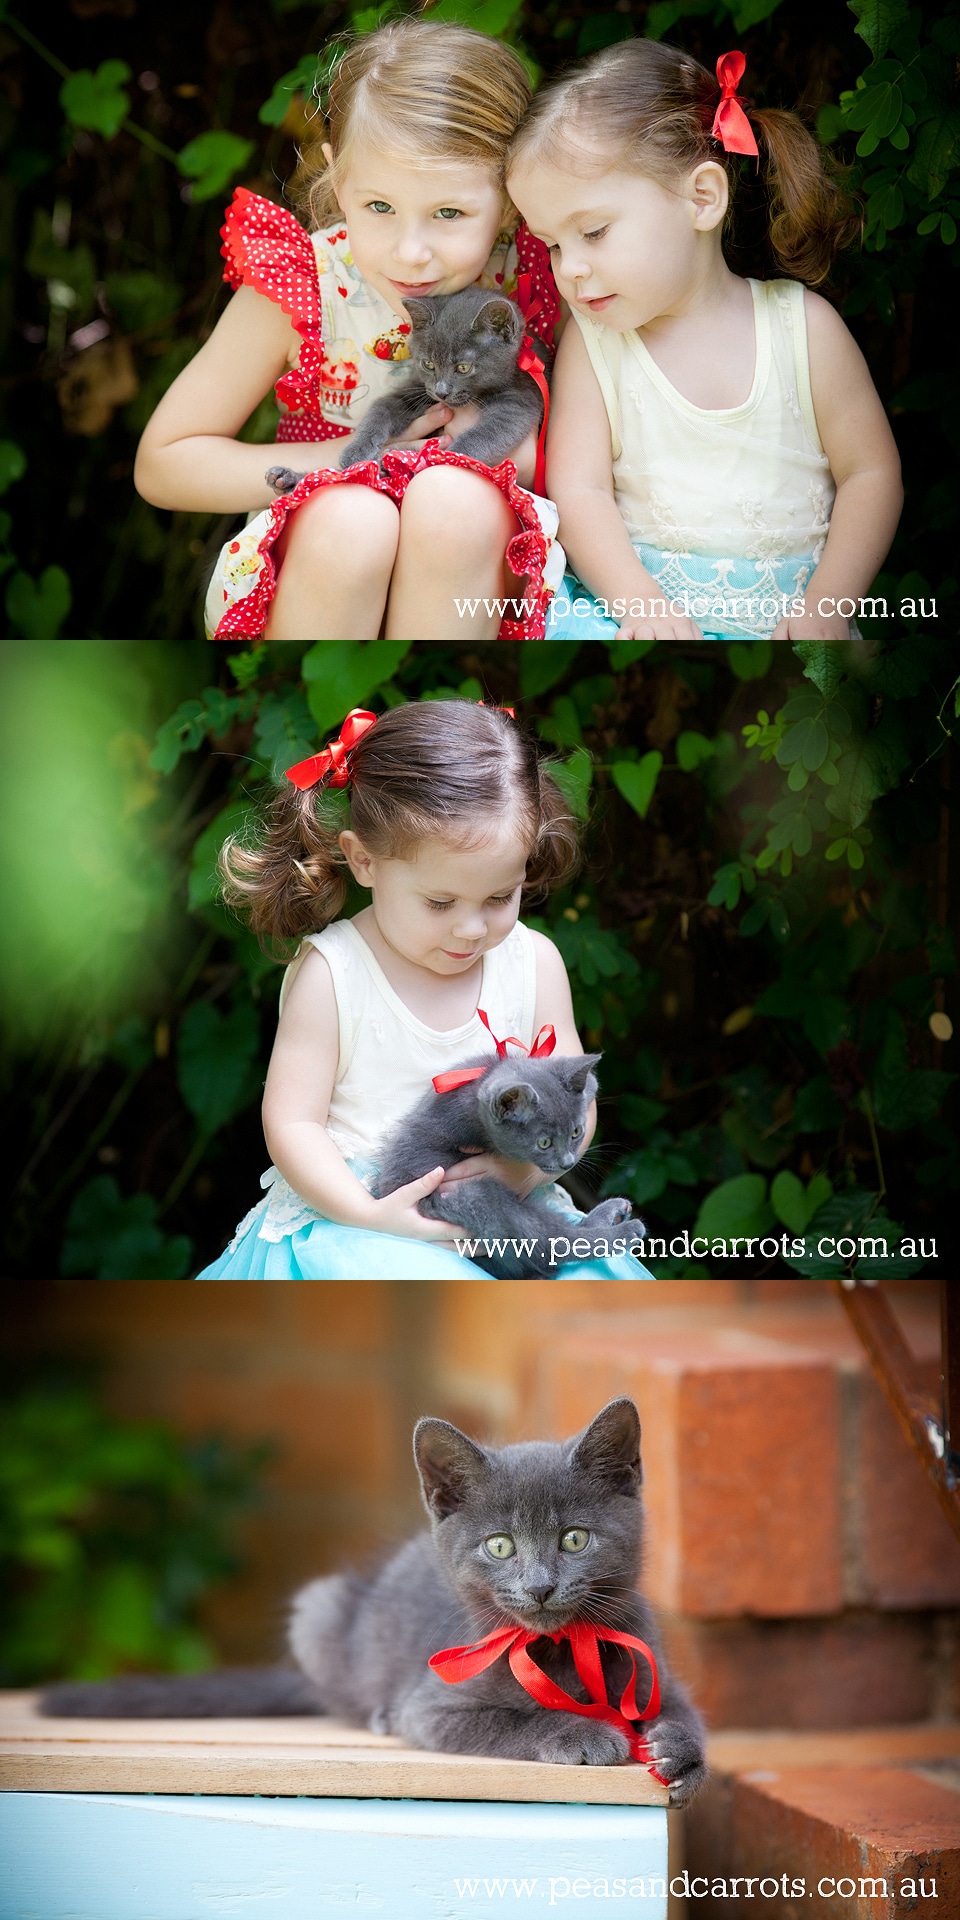 Brisbane Childrens Portrait Photography, Abby and Emily with their new baby kitten named Mr Pink in the backyard at their home in Wavell Heights.  Natural images of children and animals.  Brisbane Child Photographer Nikki Joyner, capturing whimsical and u